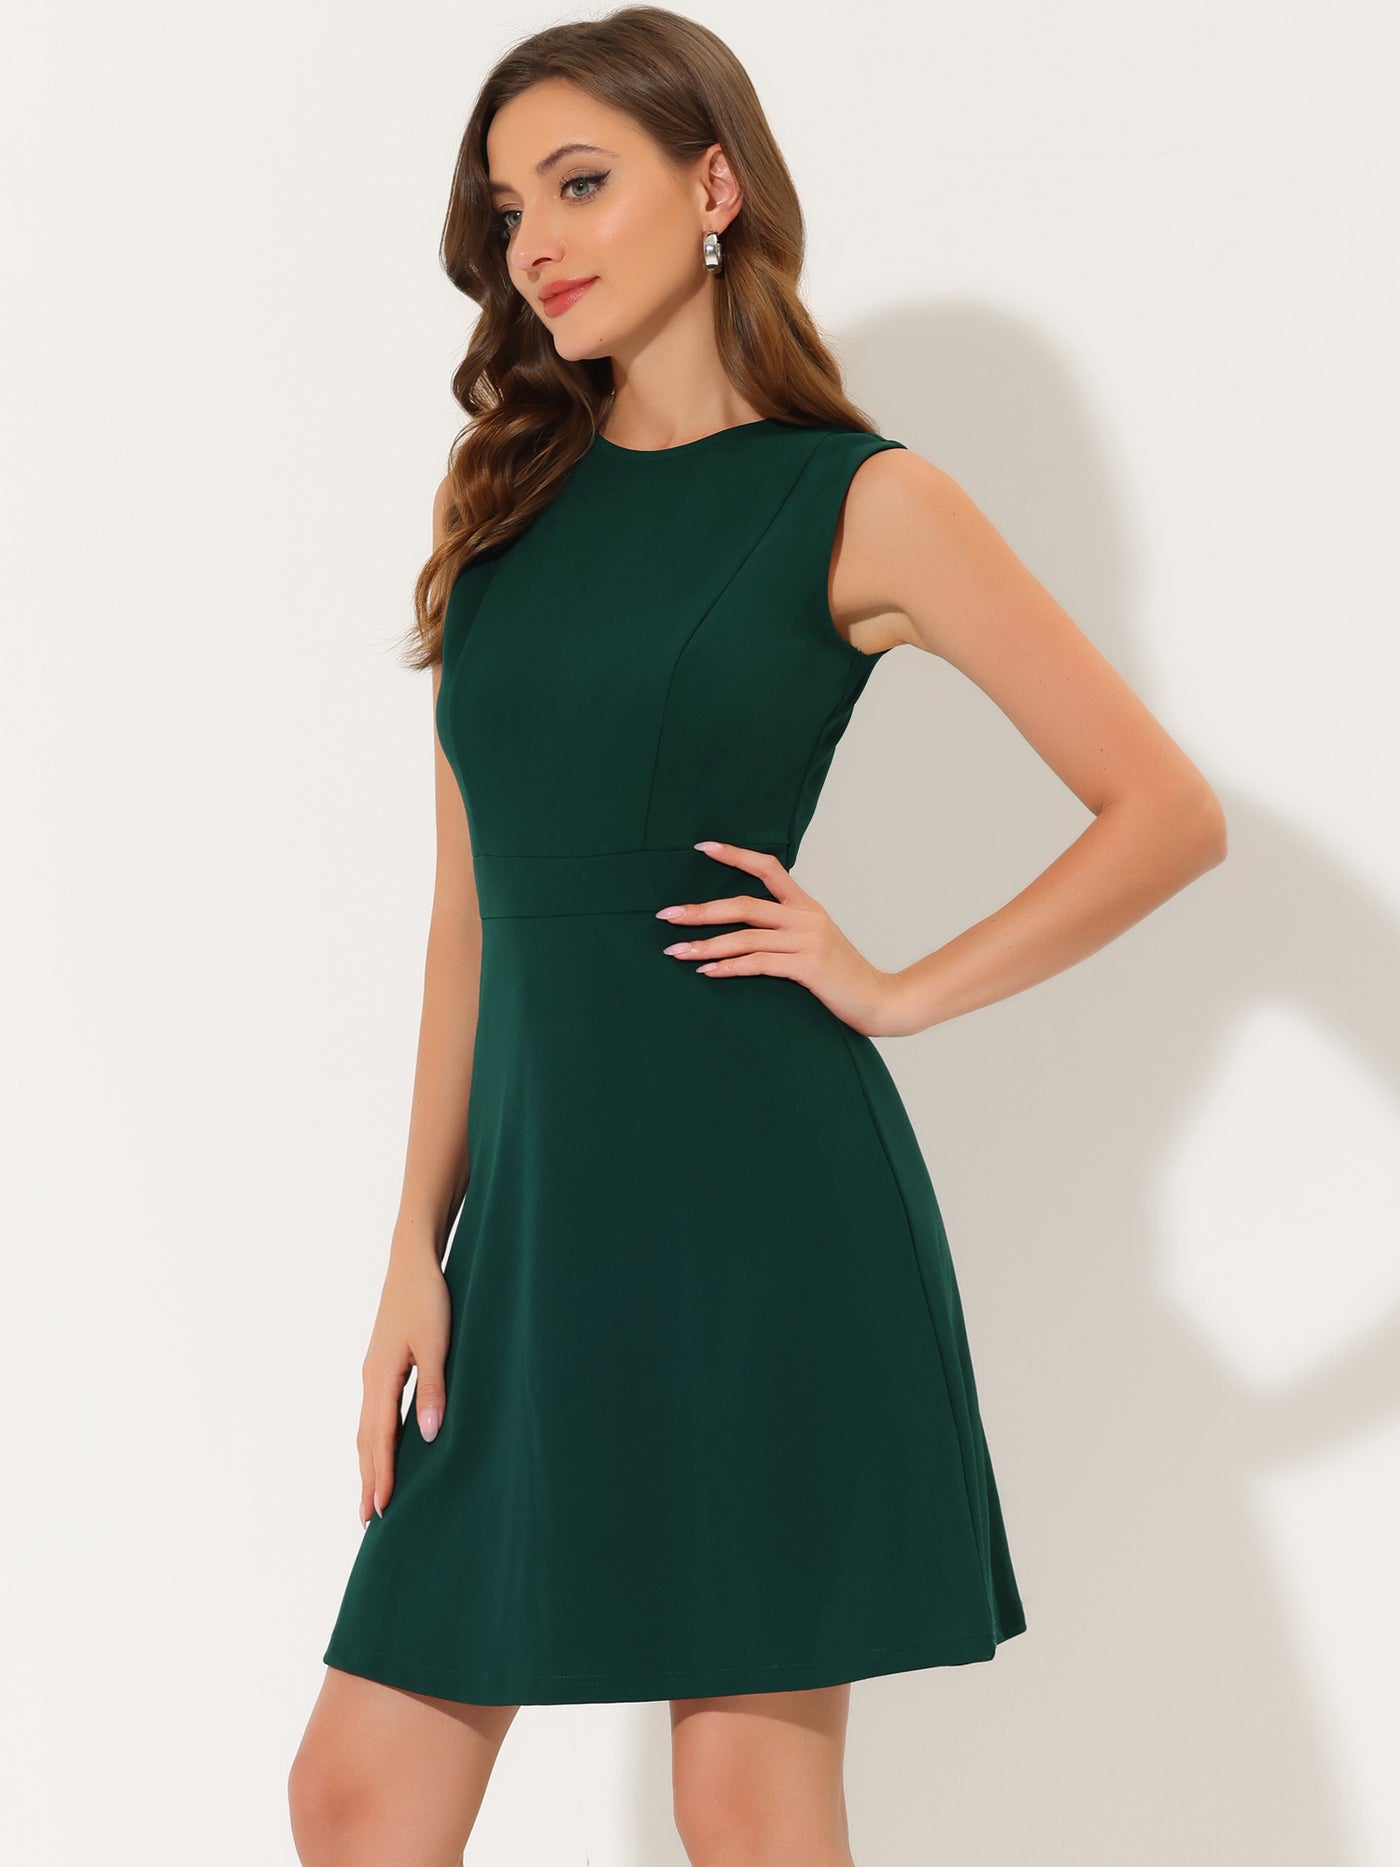 Allegra K Work Round Neck Solid Color Sleeveless Fit and Flare Dress